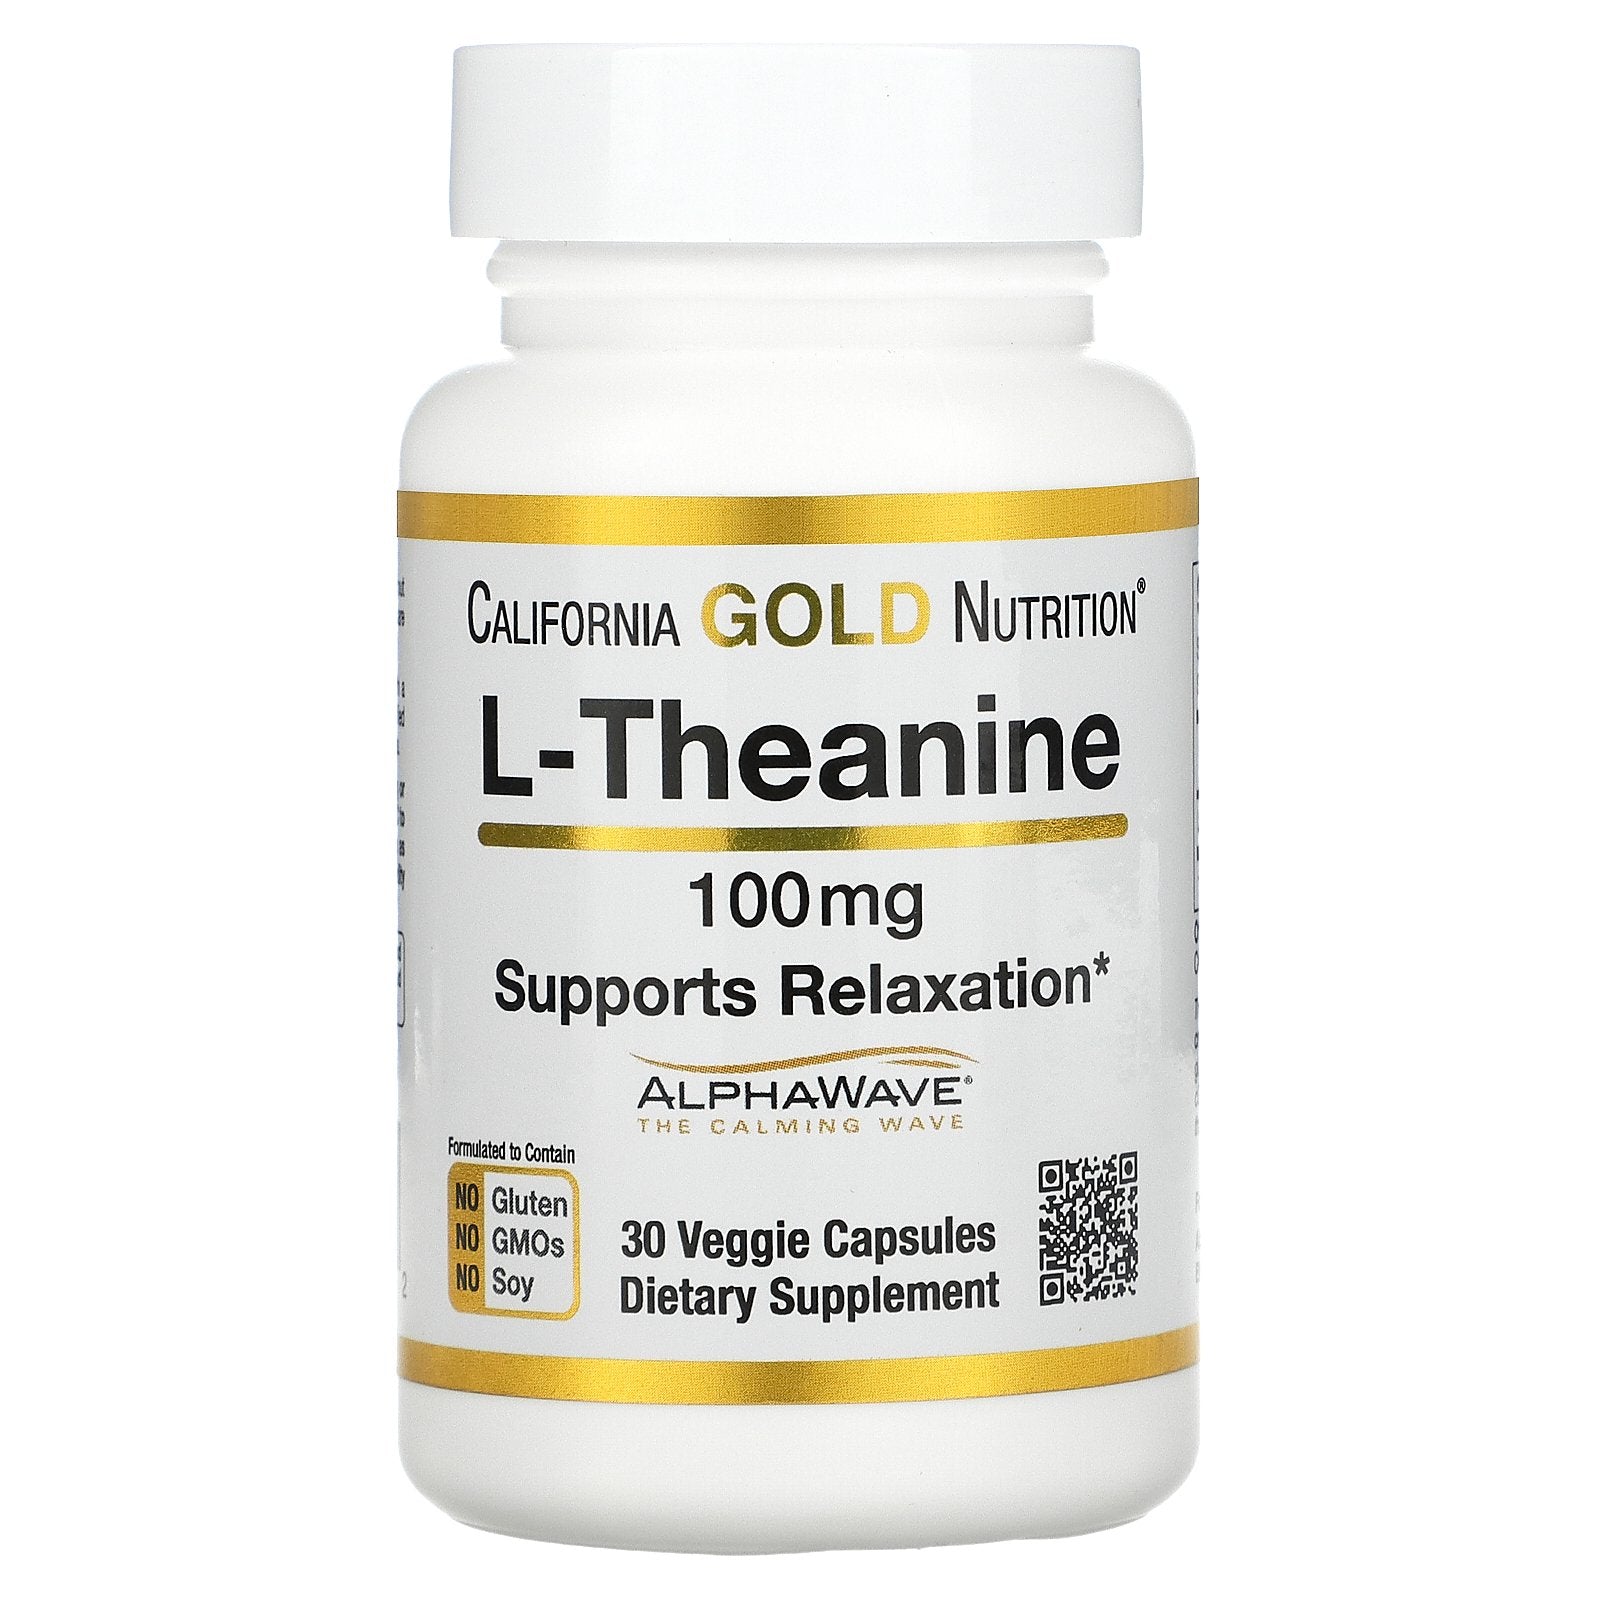 California Gold Nutrition, L-Theanine, AlphaWave, Supports Relaxation, Calm Focus, 100 mg